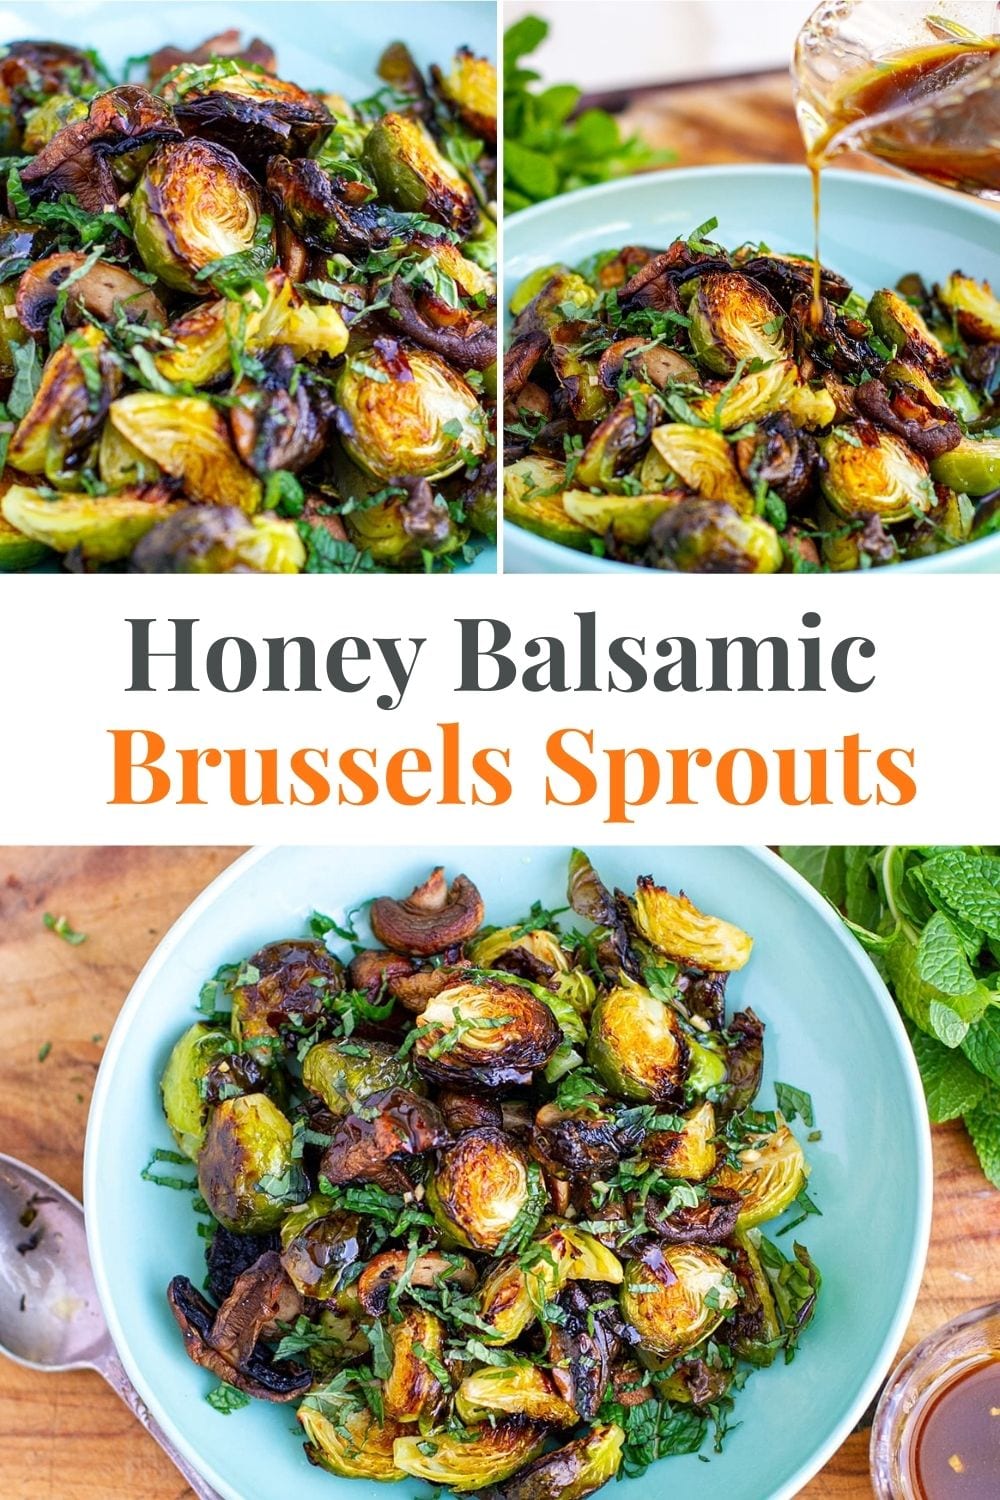 Honey Balsamic Brussels Sprouts & Mushrooms